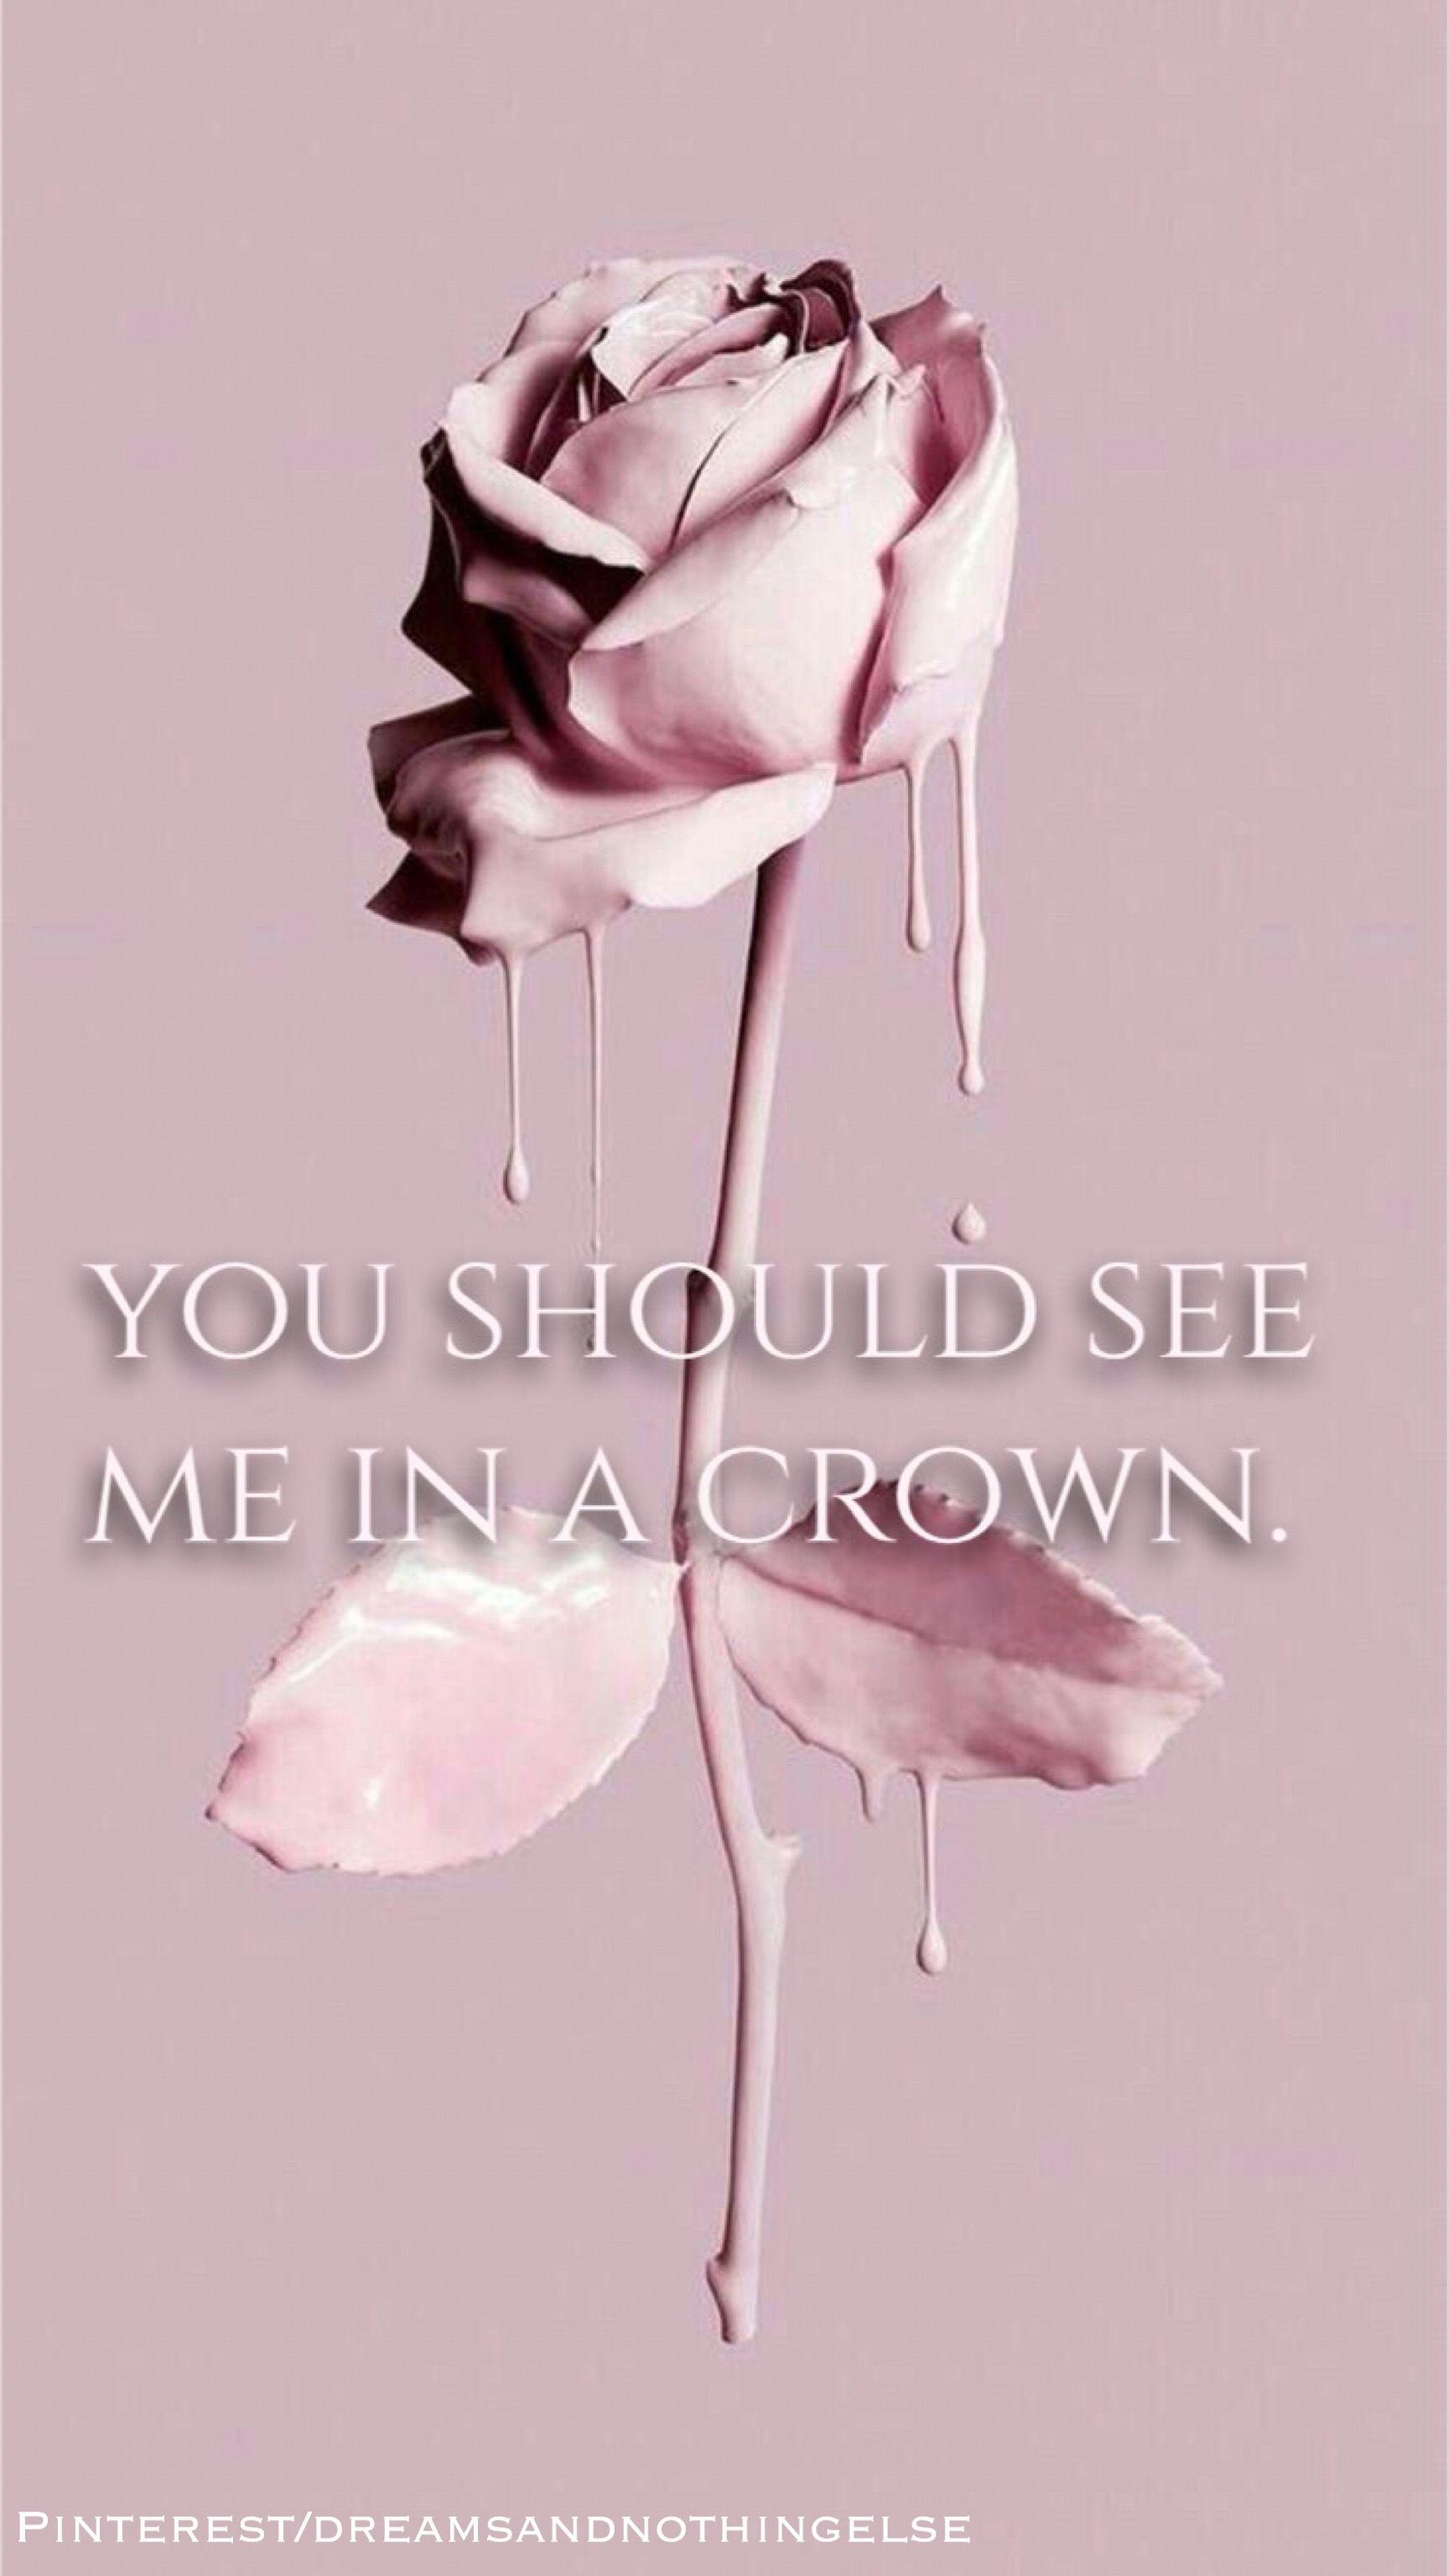 You should see me in a crown Billie Eilish wallpaper iphone